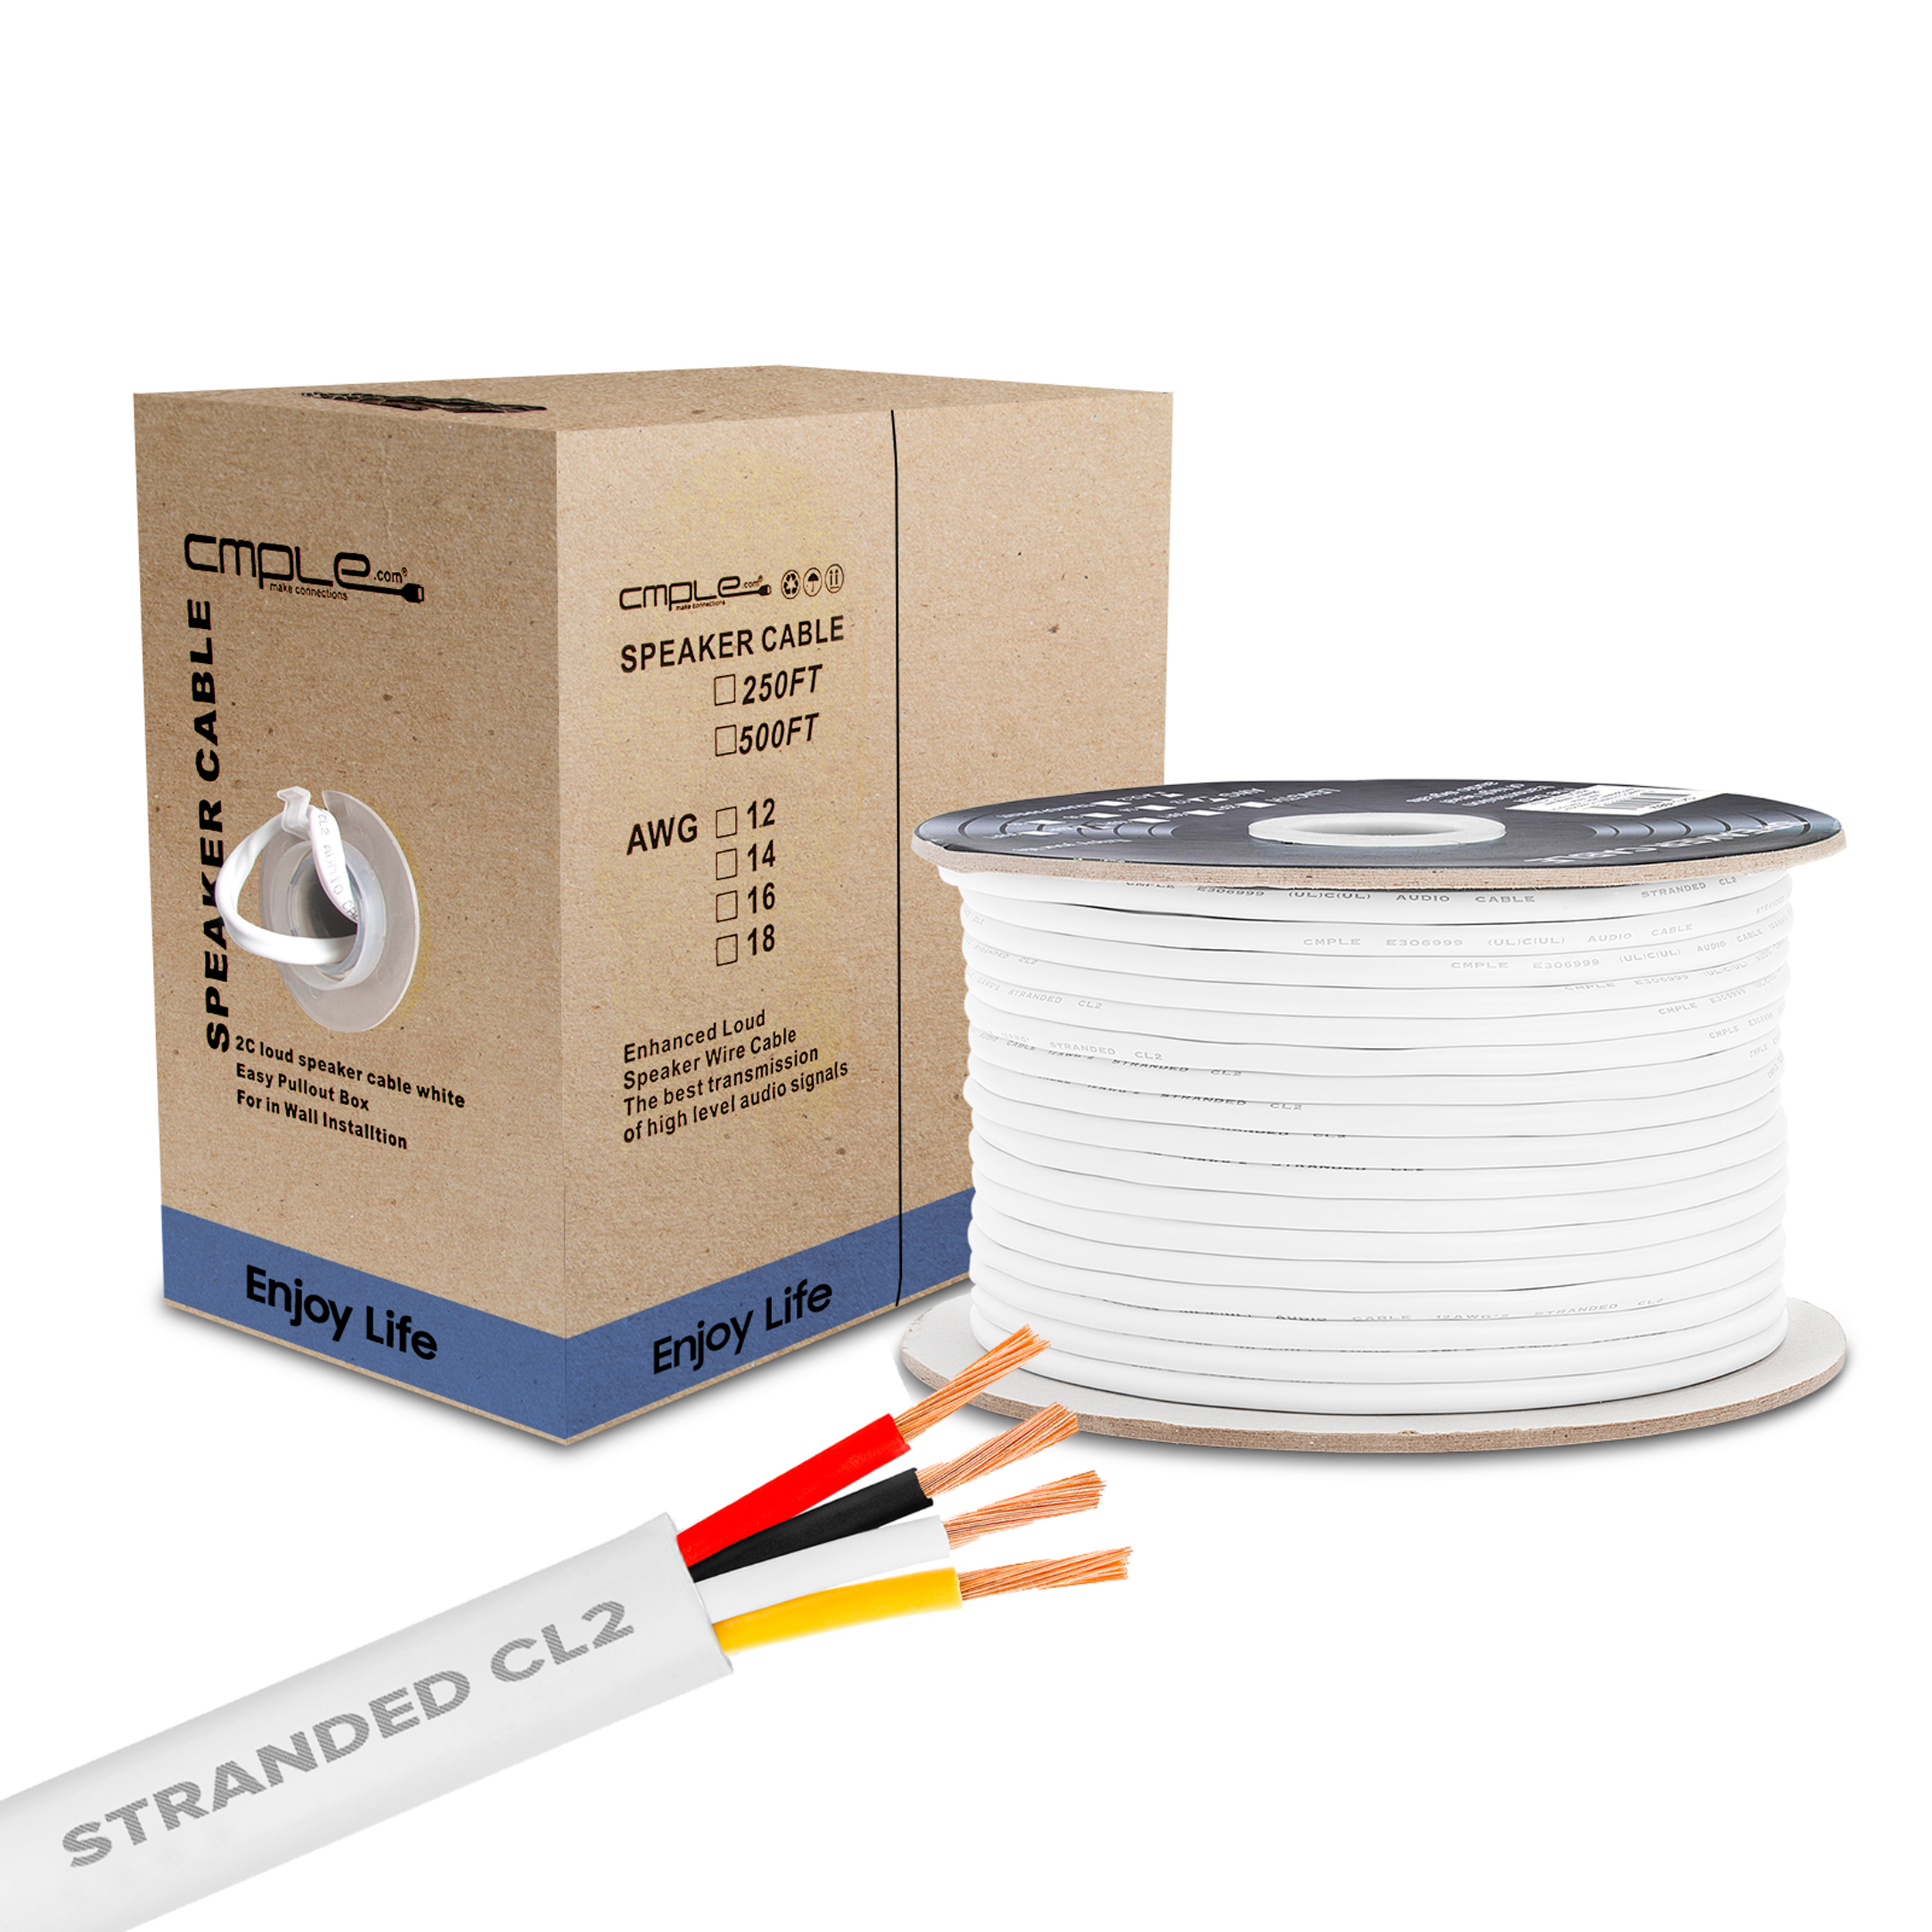 Cmple - 14AWG Speaker Wire Cable with 4 Conductor Speaker Cable (CCA) Copper Clad Aluminum CL2 Rated In-Wall Speaker Wire - 250 Feet, White - image 1 of 6